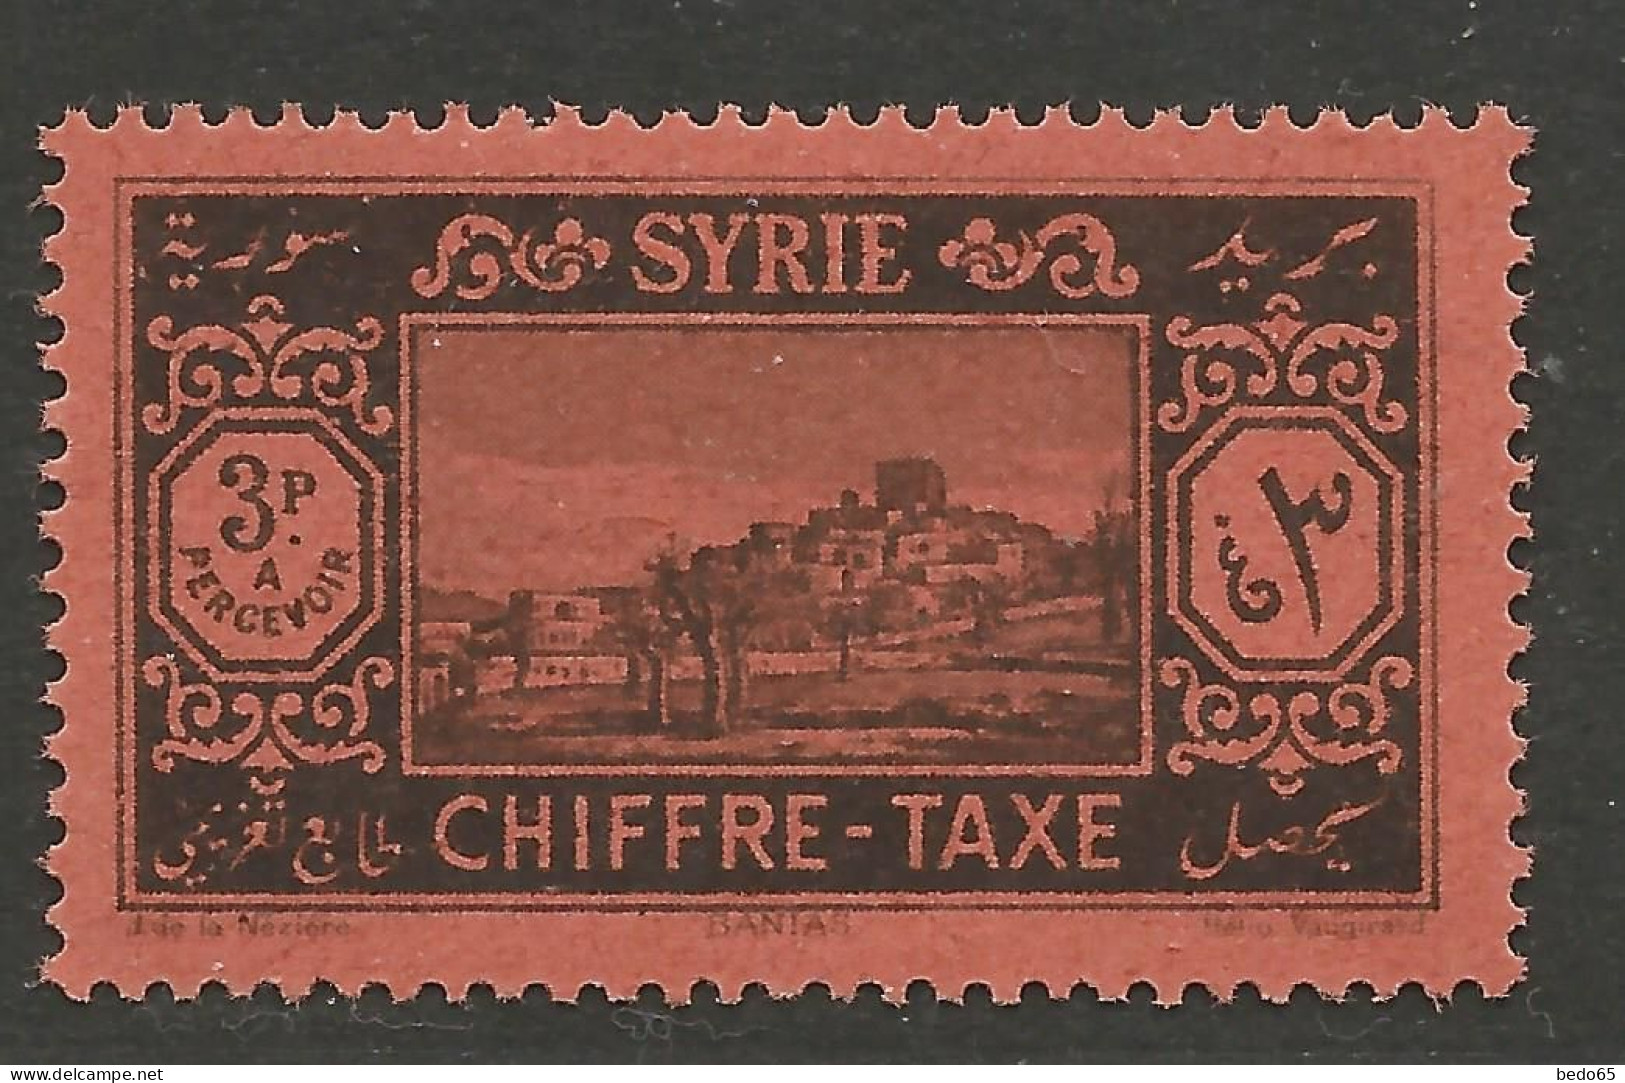 SYRIE N° 35 NEUF** LUXE SANS CHARNIERE / Hingeless / MNH - Postage Due